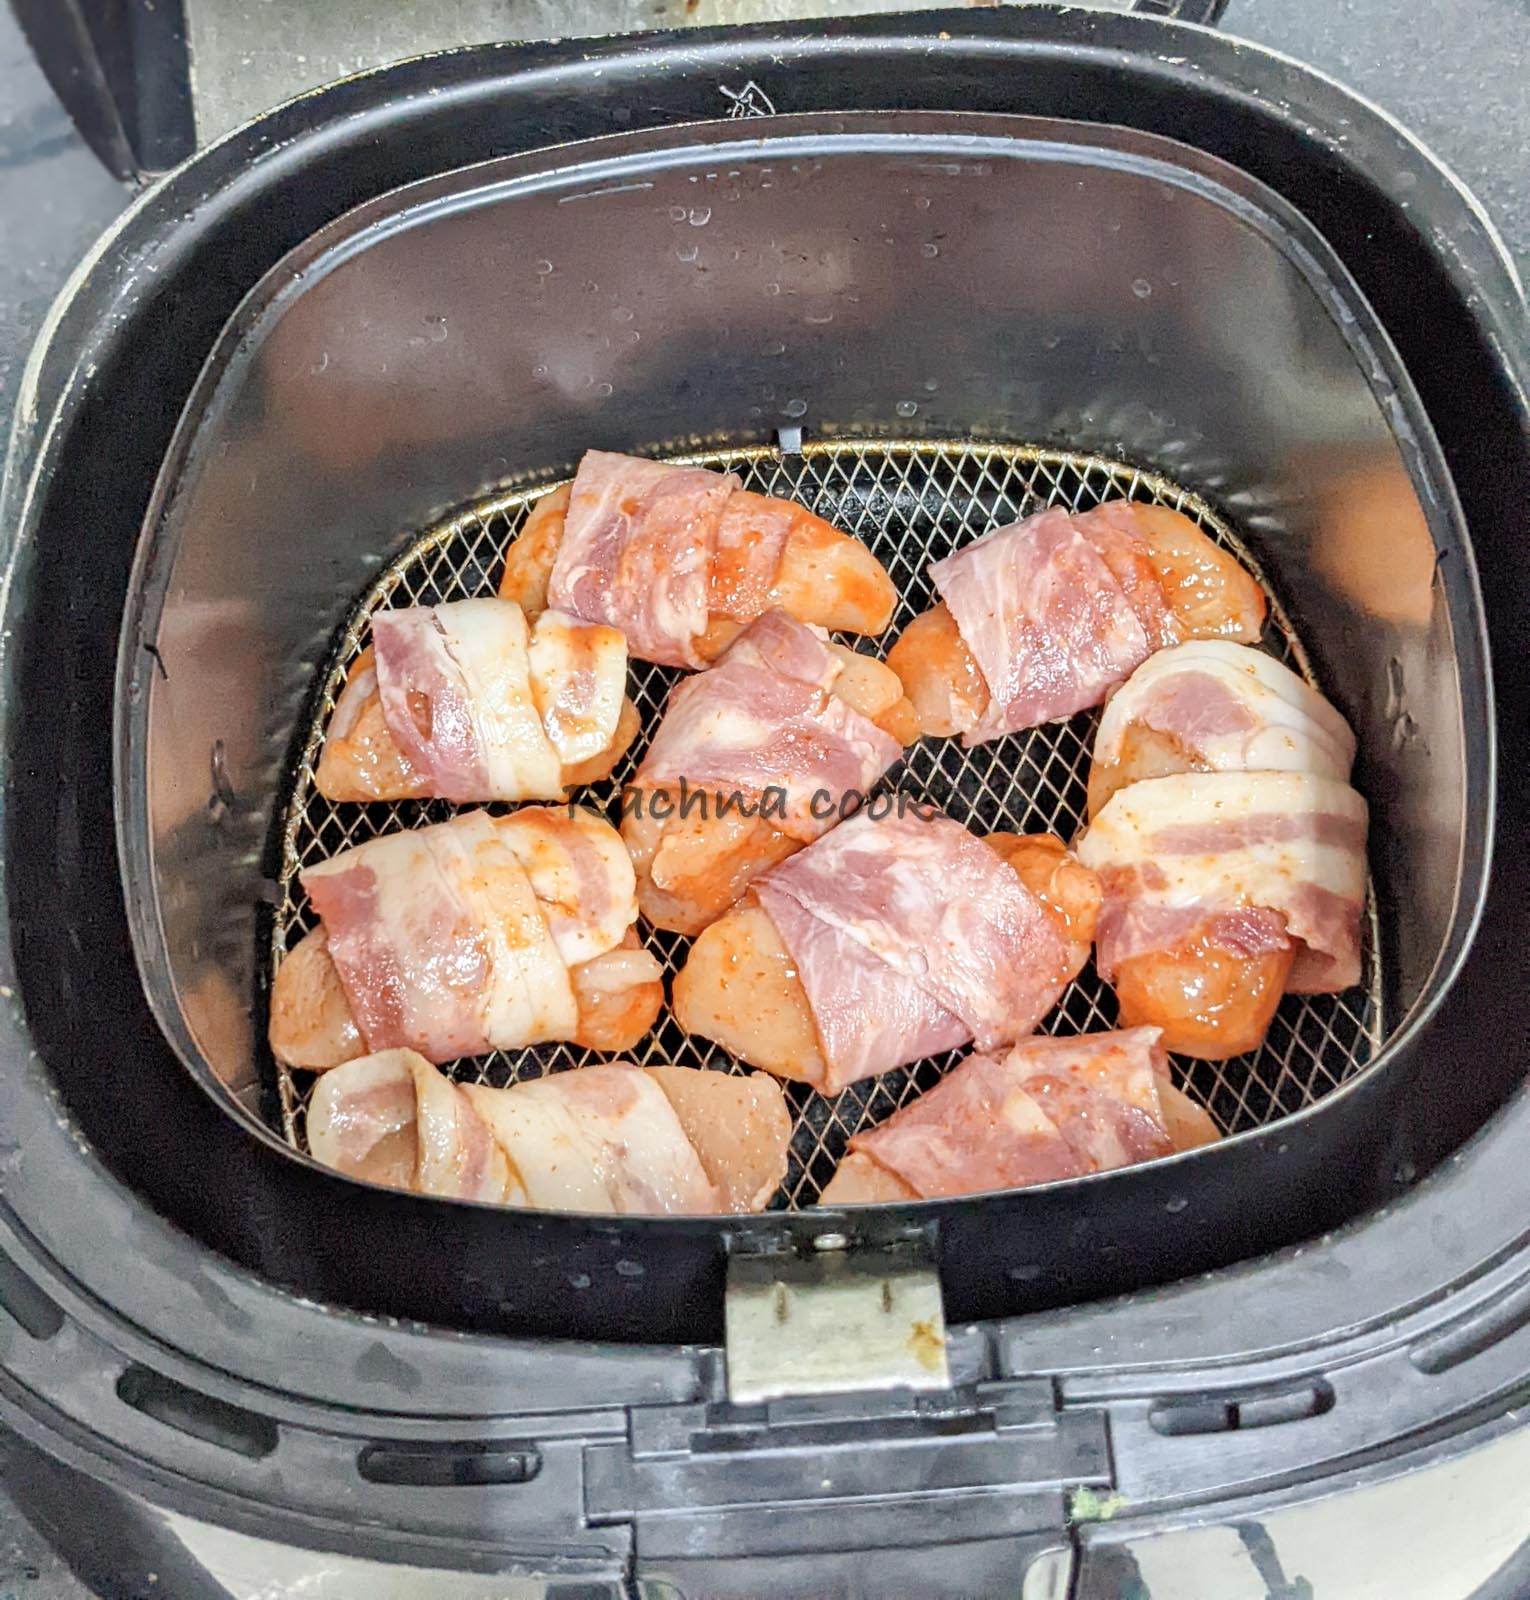 Bacon wrapped chicken bites placed in air fryer basket ready for air frying.